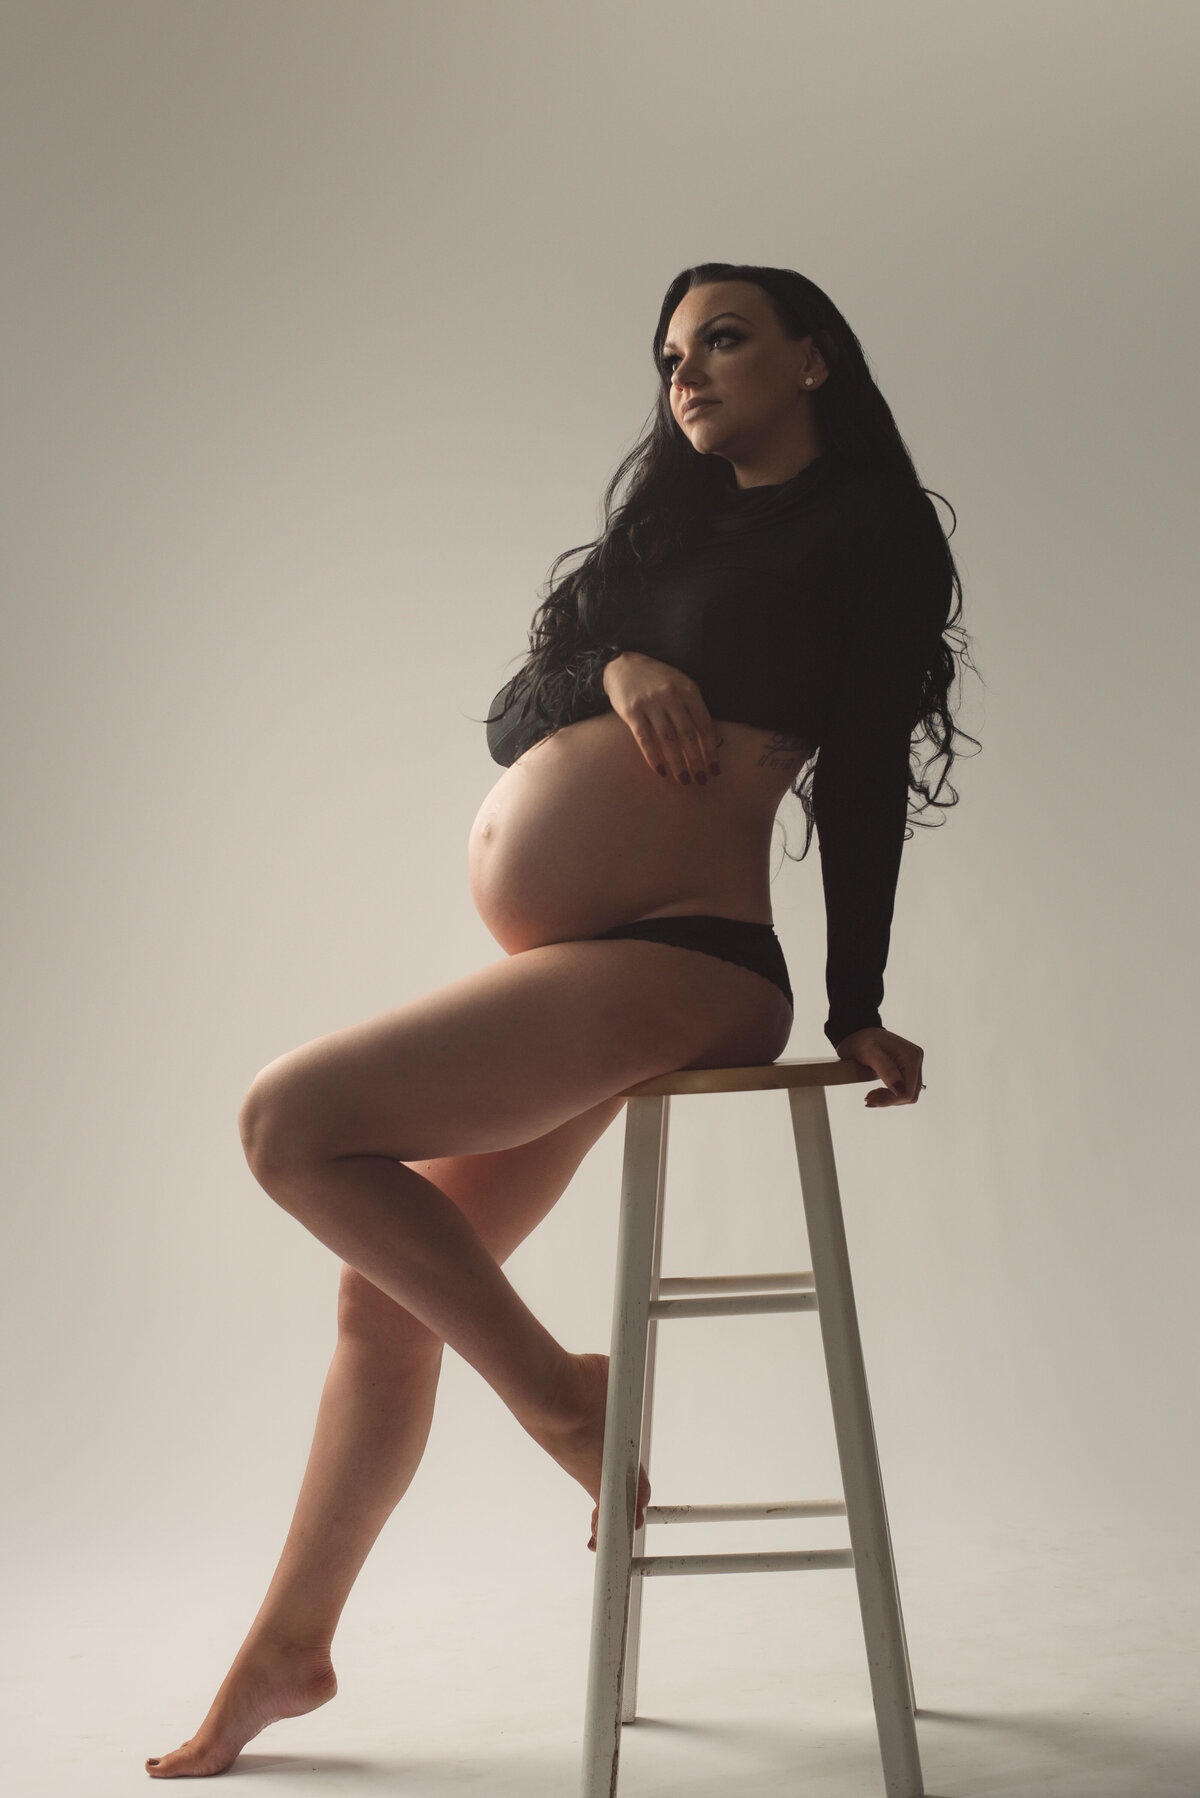 Pregnant lady at 34 weeks sitting on stool posing with one foot on stool holding baby bump and wearing long sleeve black crop top and black panties